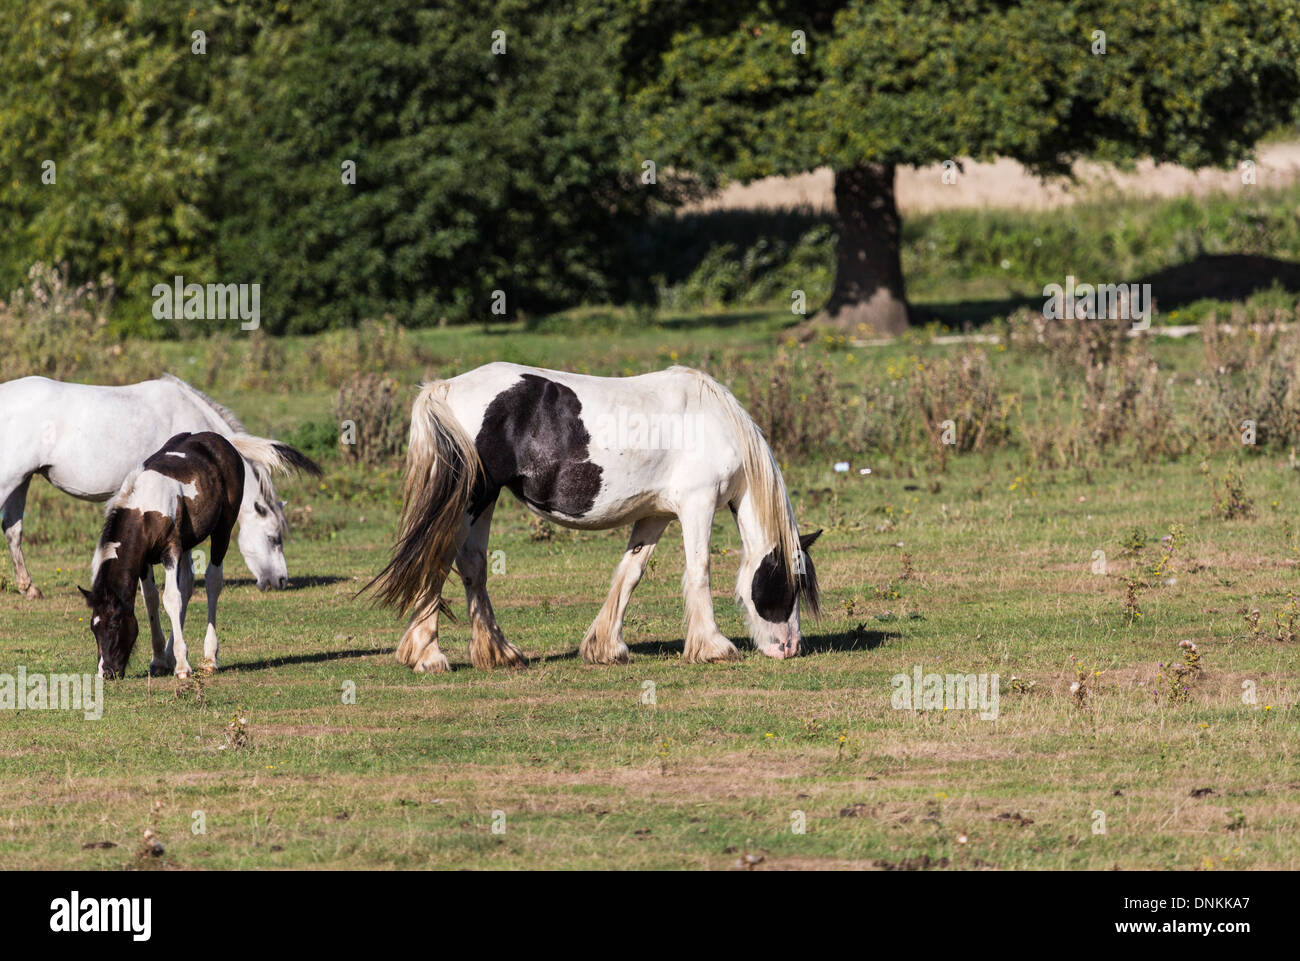 Black and white carthorse and foal grazing in field in Surrey countryside Stock Photo